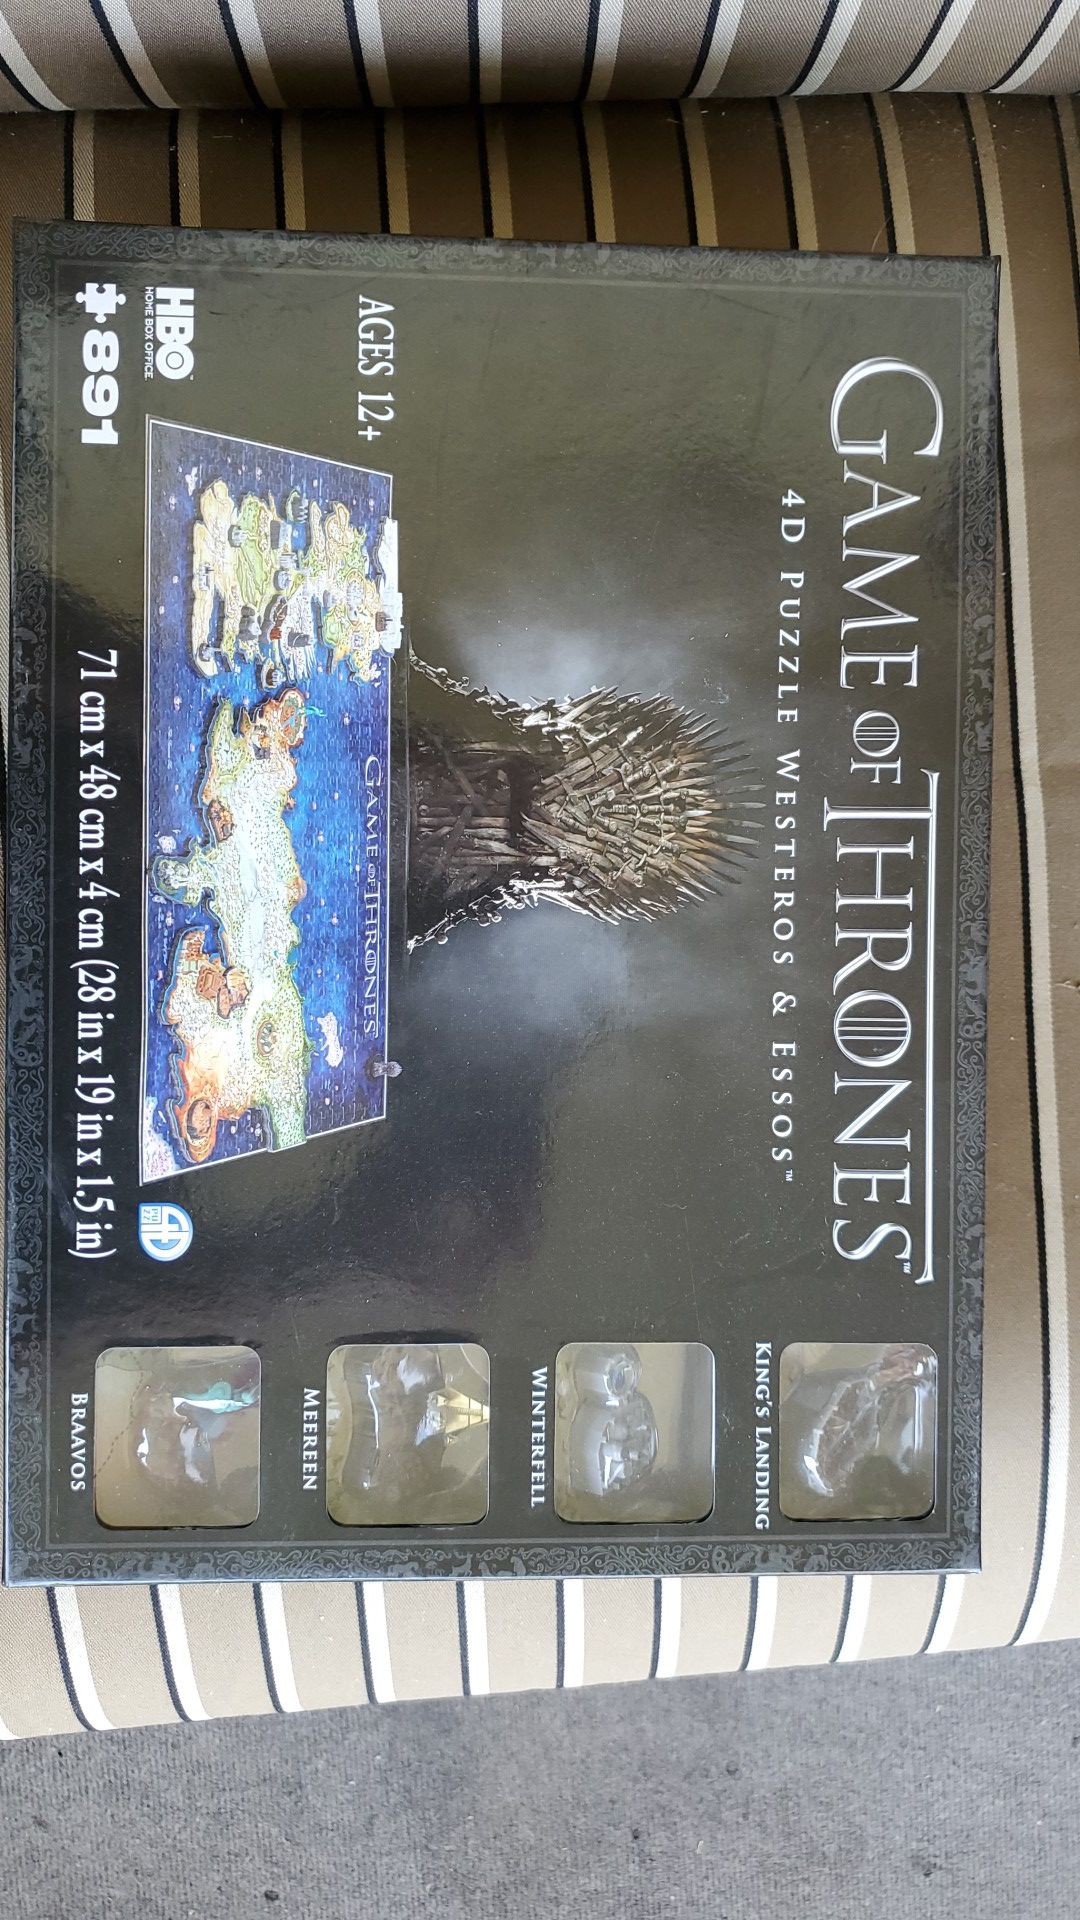 New sealed in box Game of thrones 4d puzzle